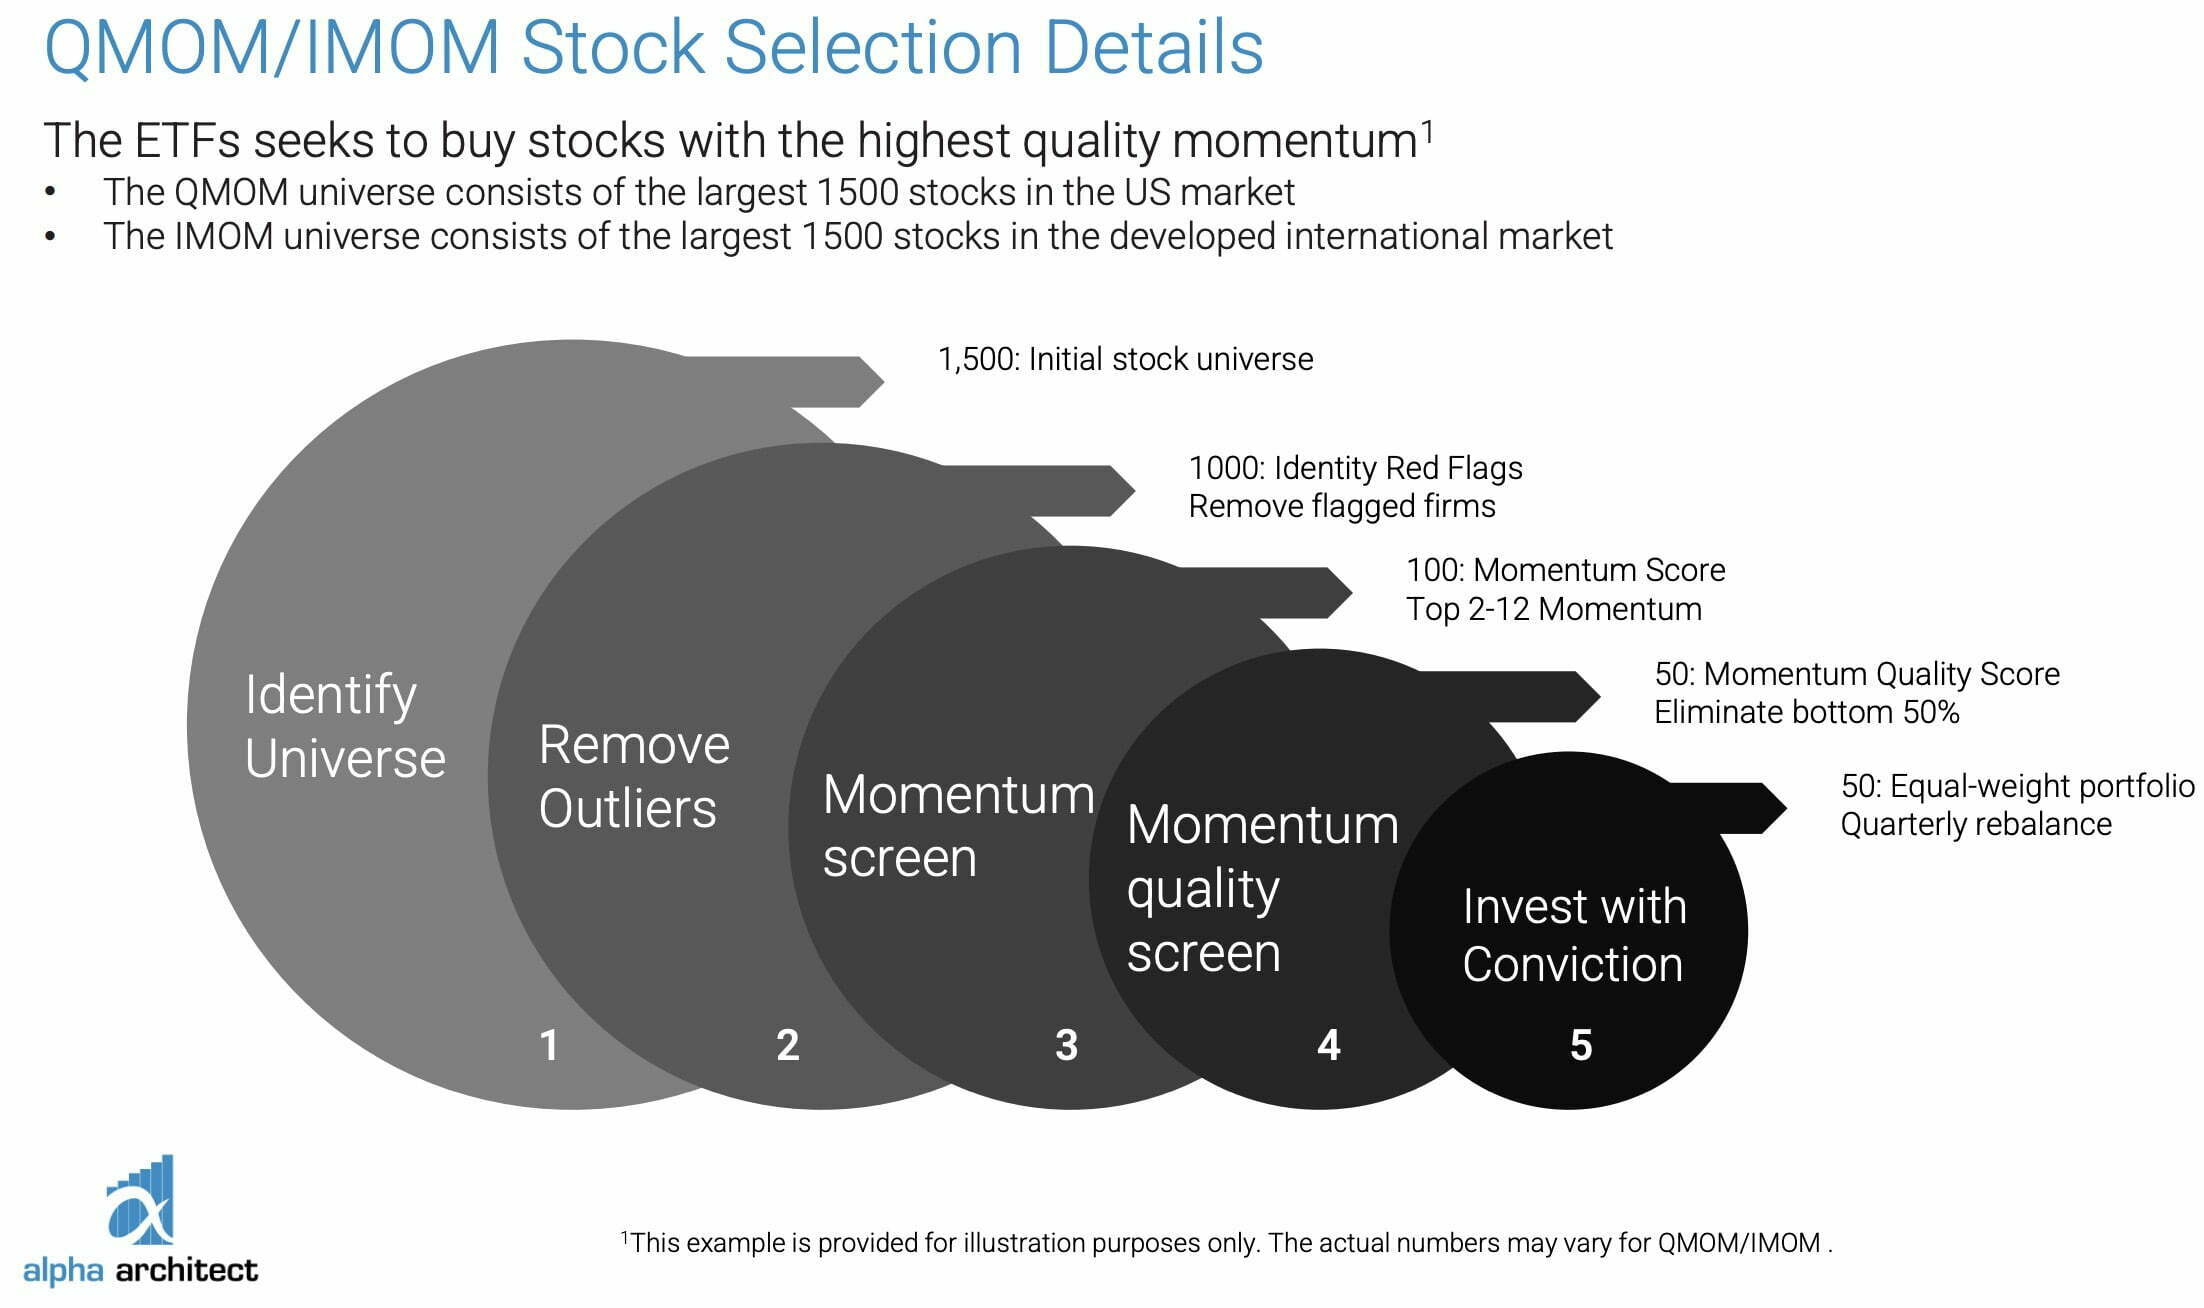 QMOM ETF stock selection details from identifying the universe to investing with conviction 